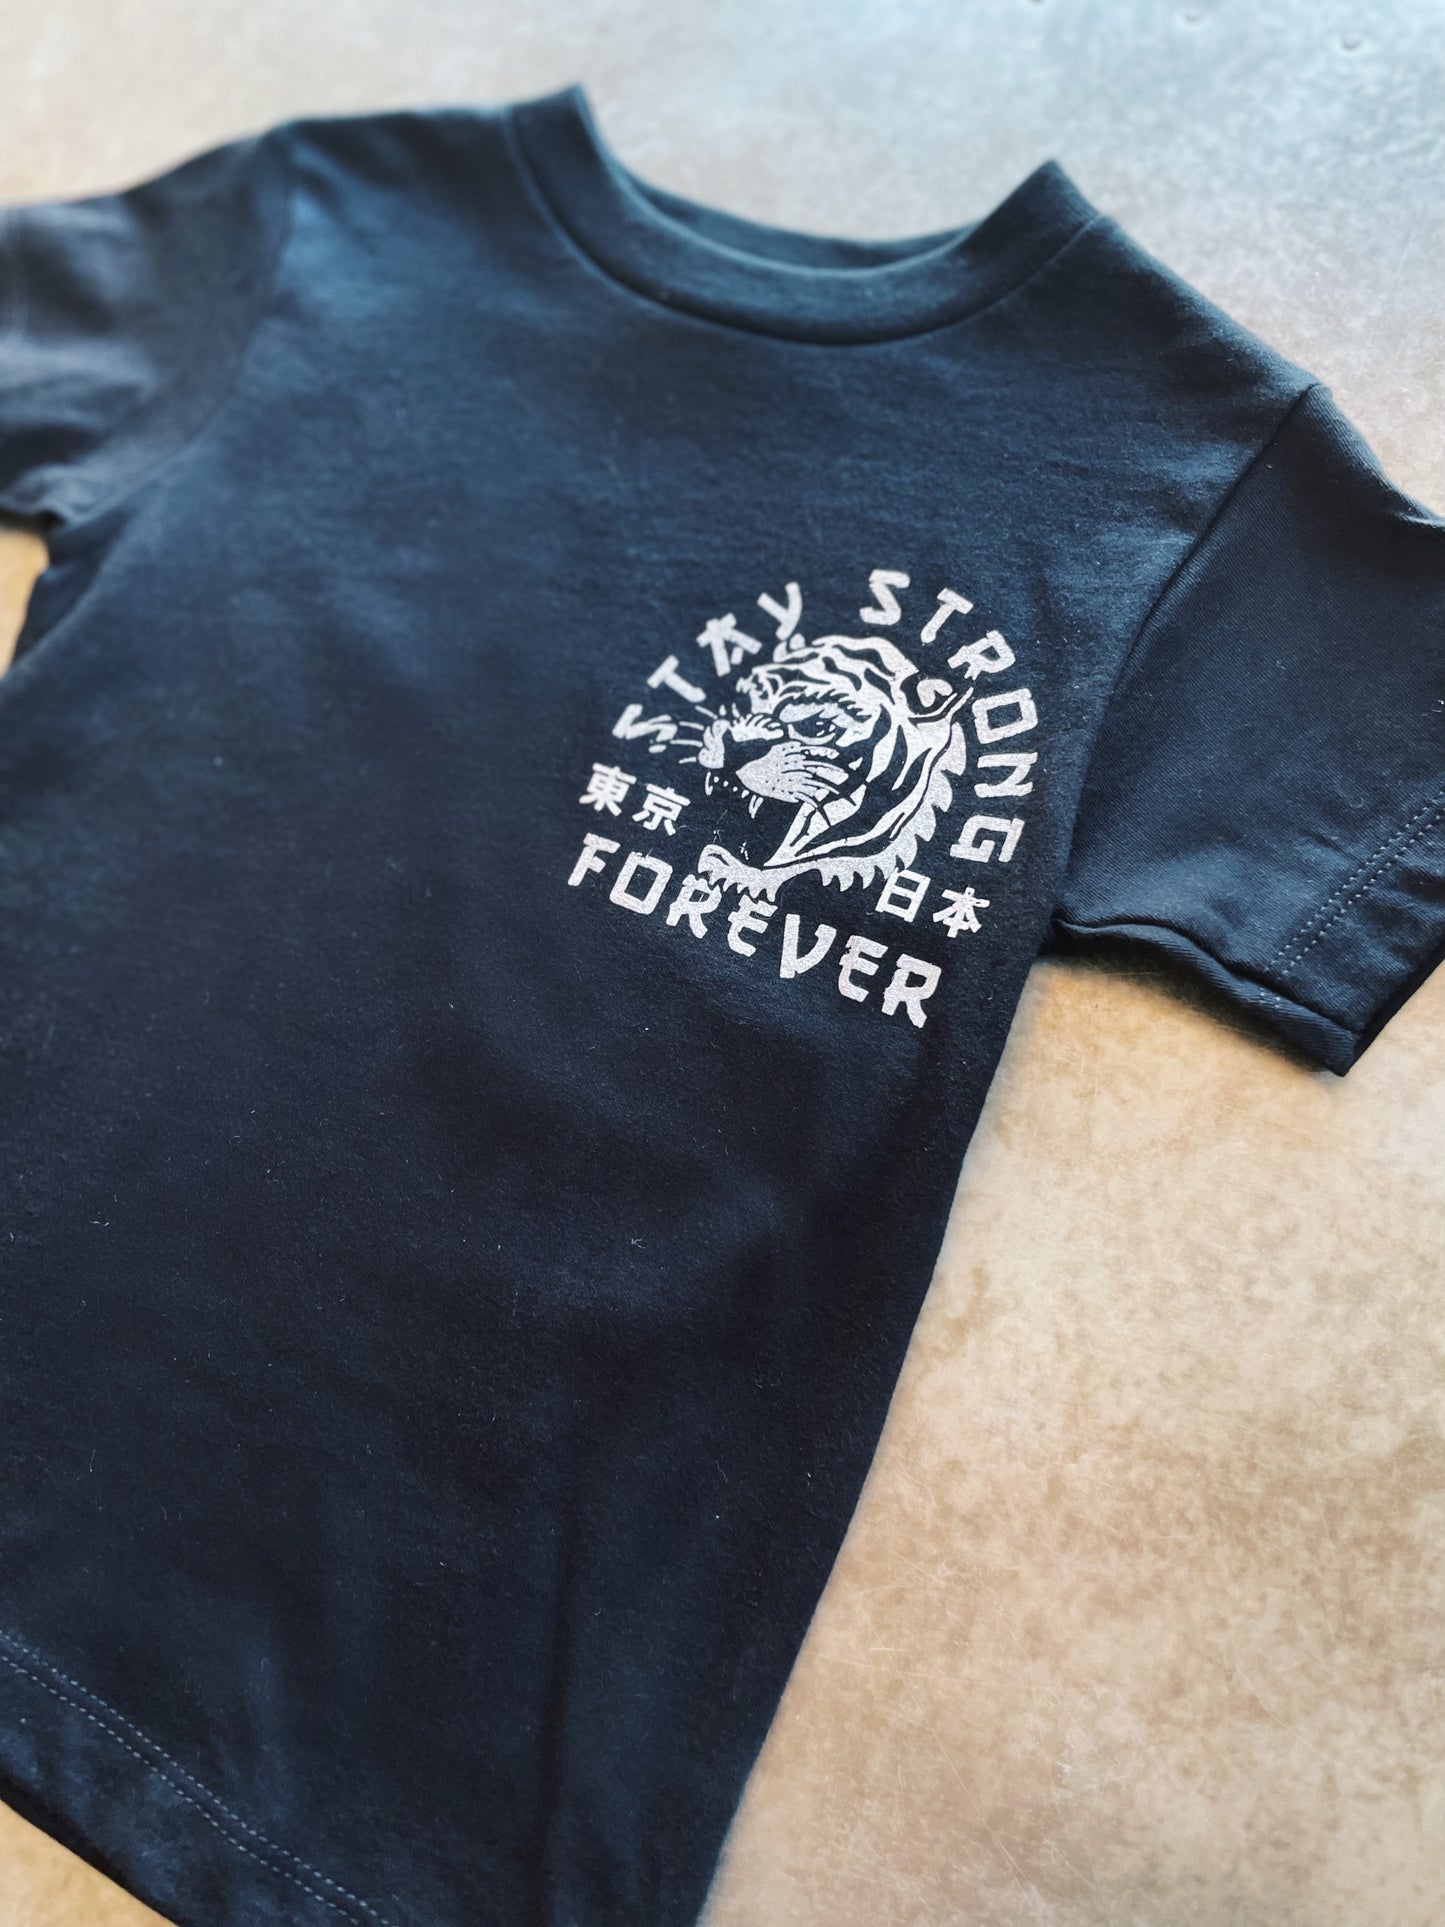 Stay Strong Forever Toddler Graphic T-shirt